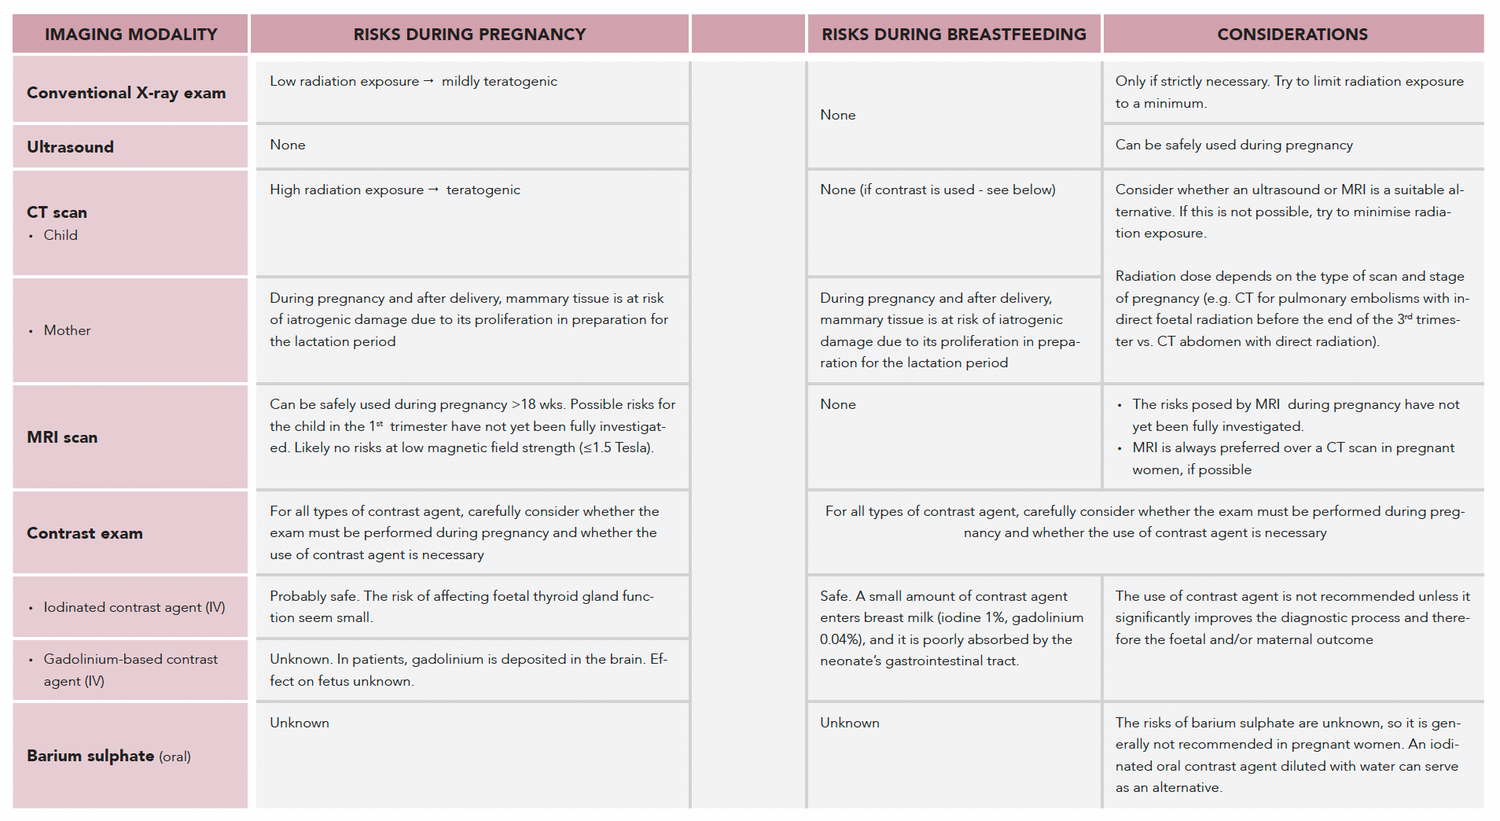 Table: Imaging risks during pregnancy and breastfeeding (X-ray, Ultrasound, CT scan, MRI scan, Contrast exam)